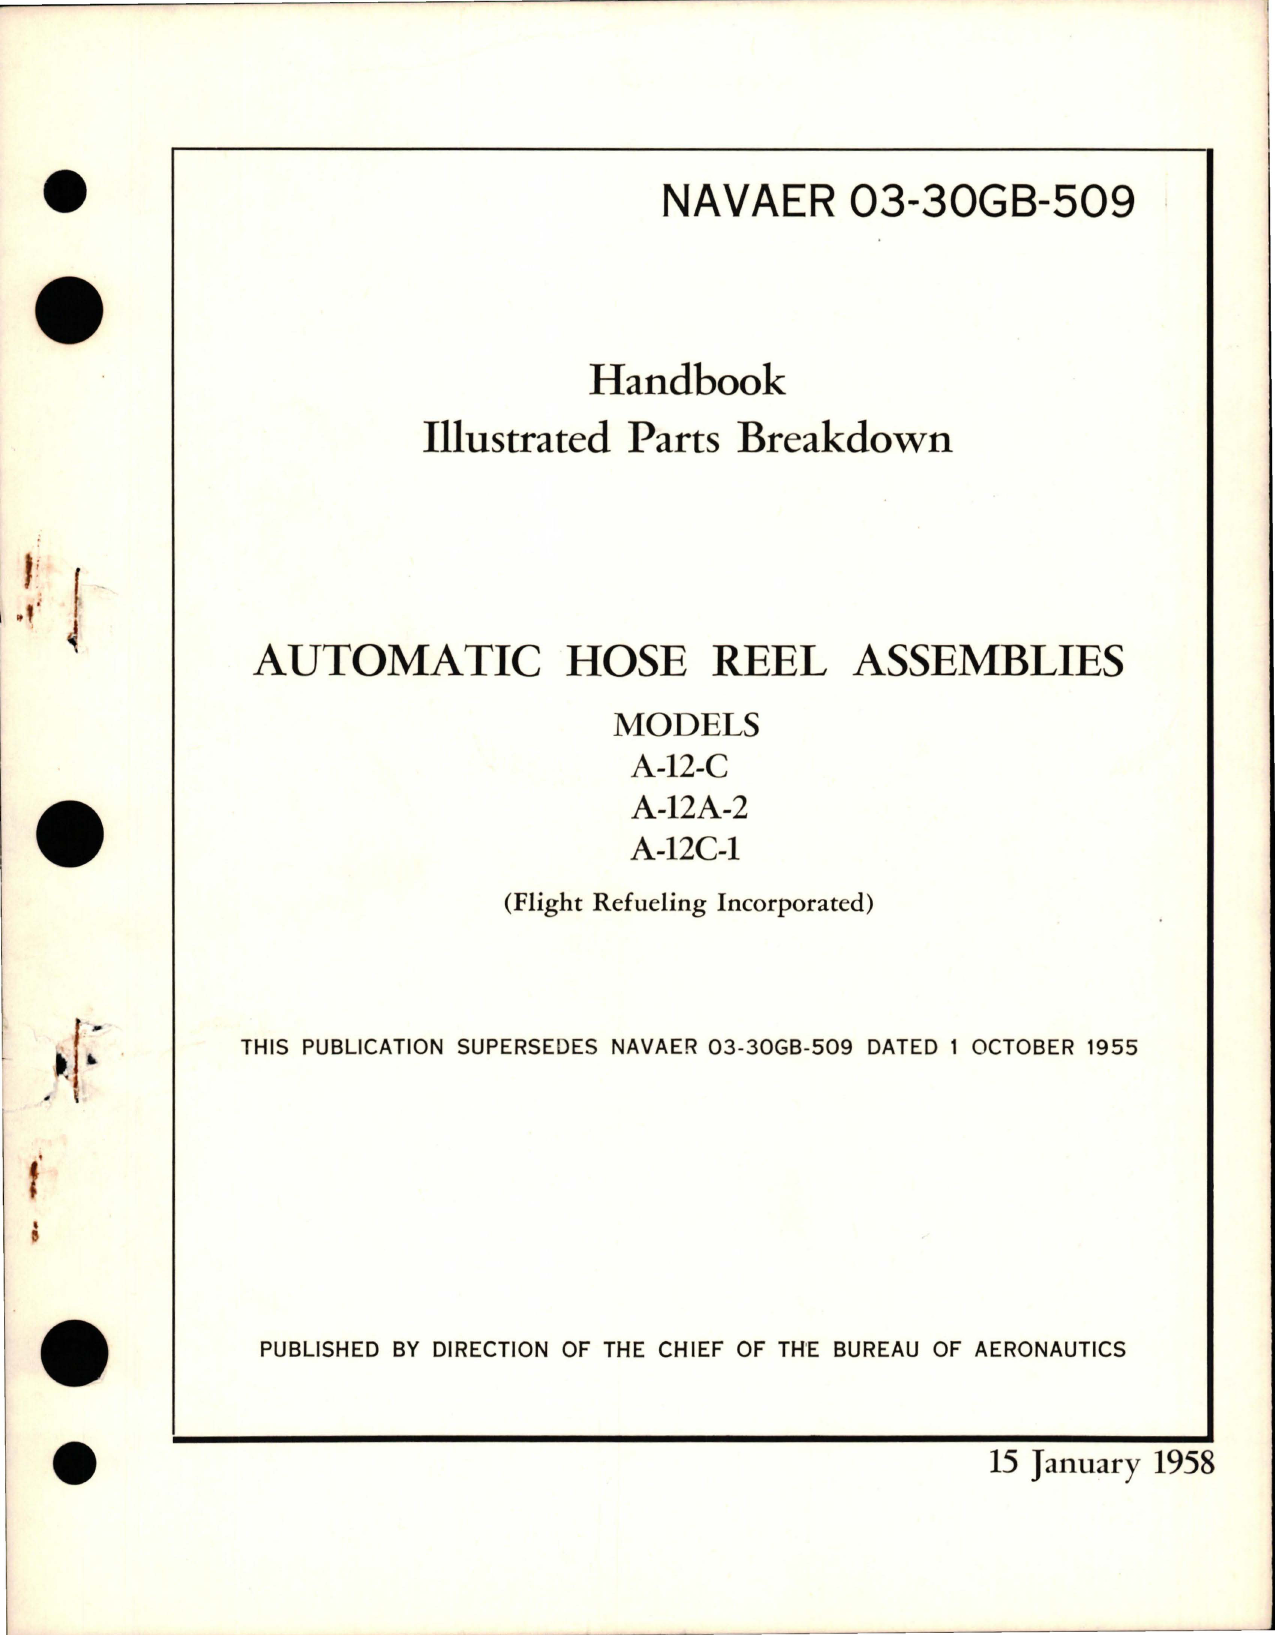 Sample page 1 from AirCorps Library document: Illustrated Parts Breakdown for Automatic Hose Reel Assemblies - Models A-12C, A-12A-2, and A-12C-1